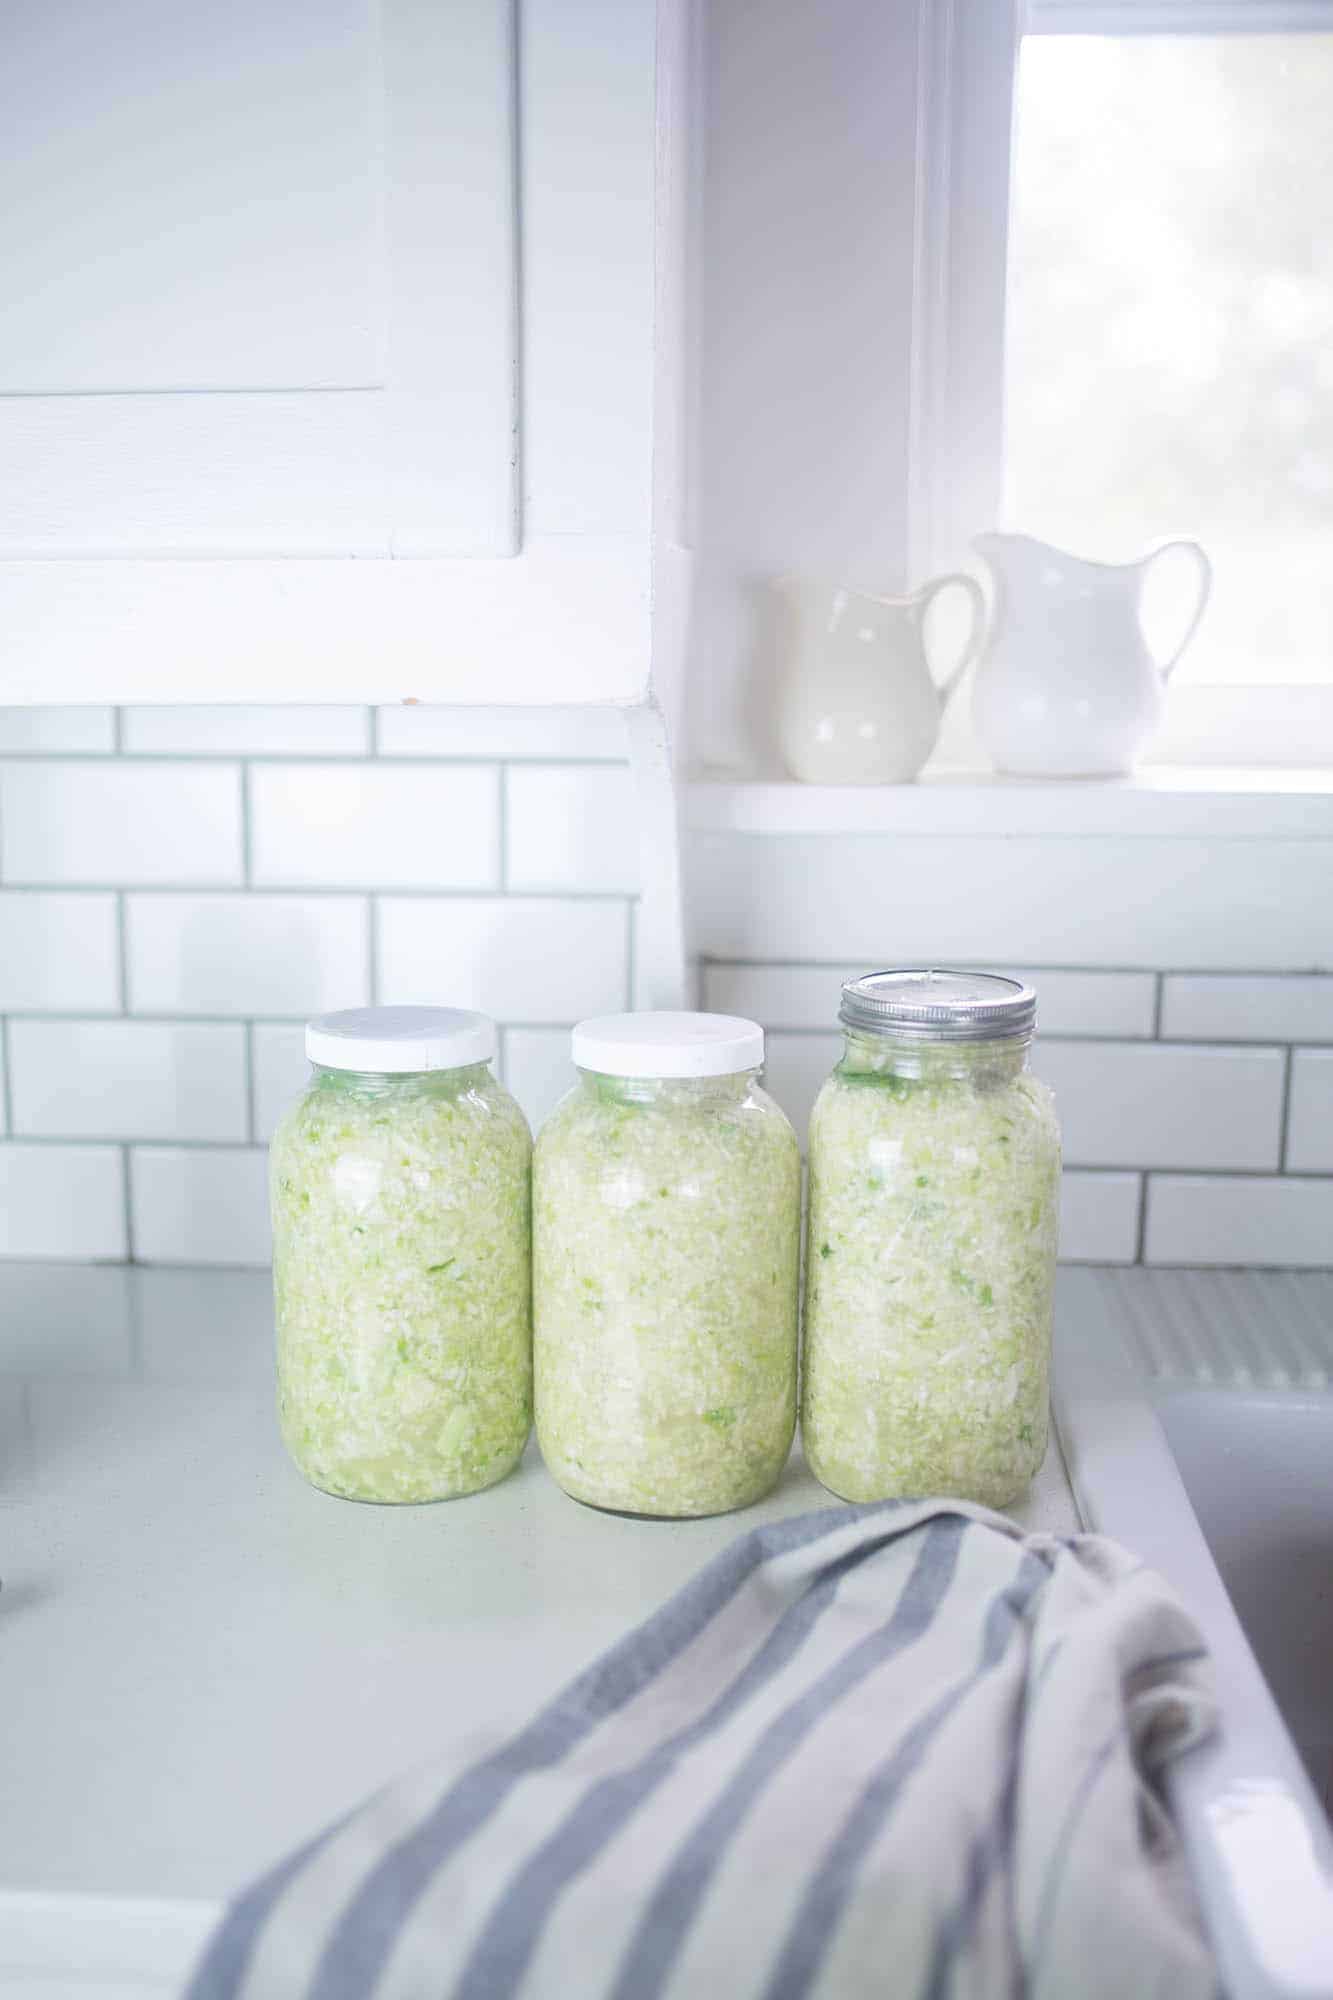 Learn how to make sauerkraut with this recipe for fermented vegetables that promote gut health